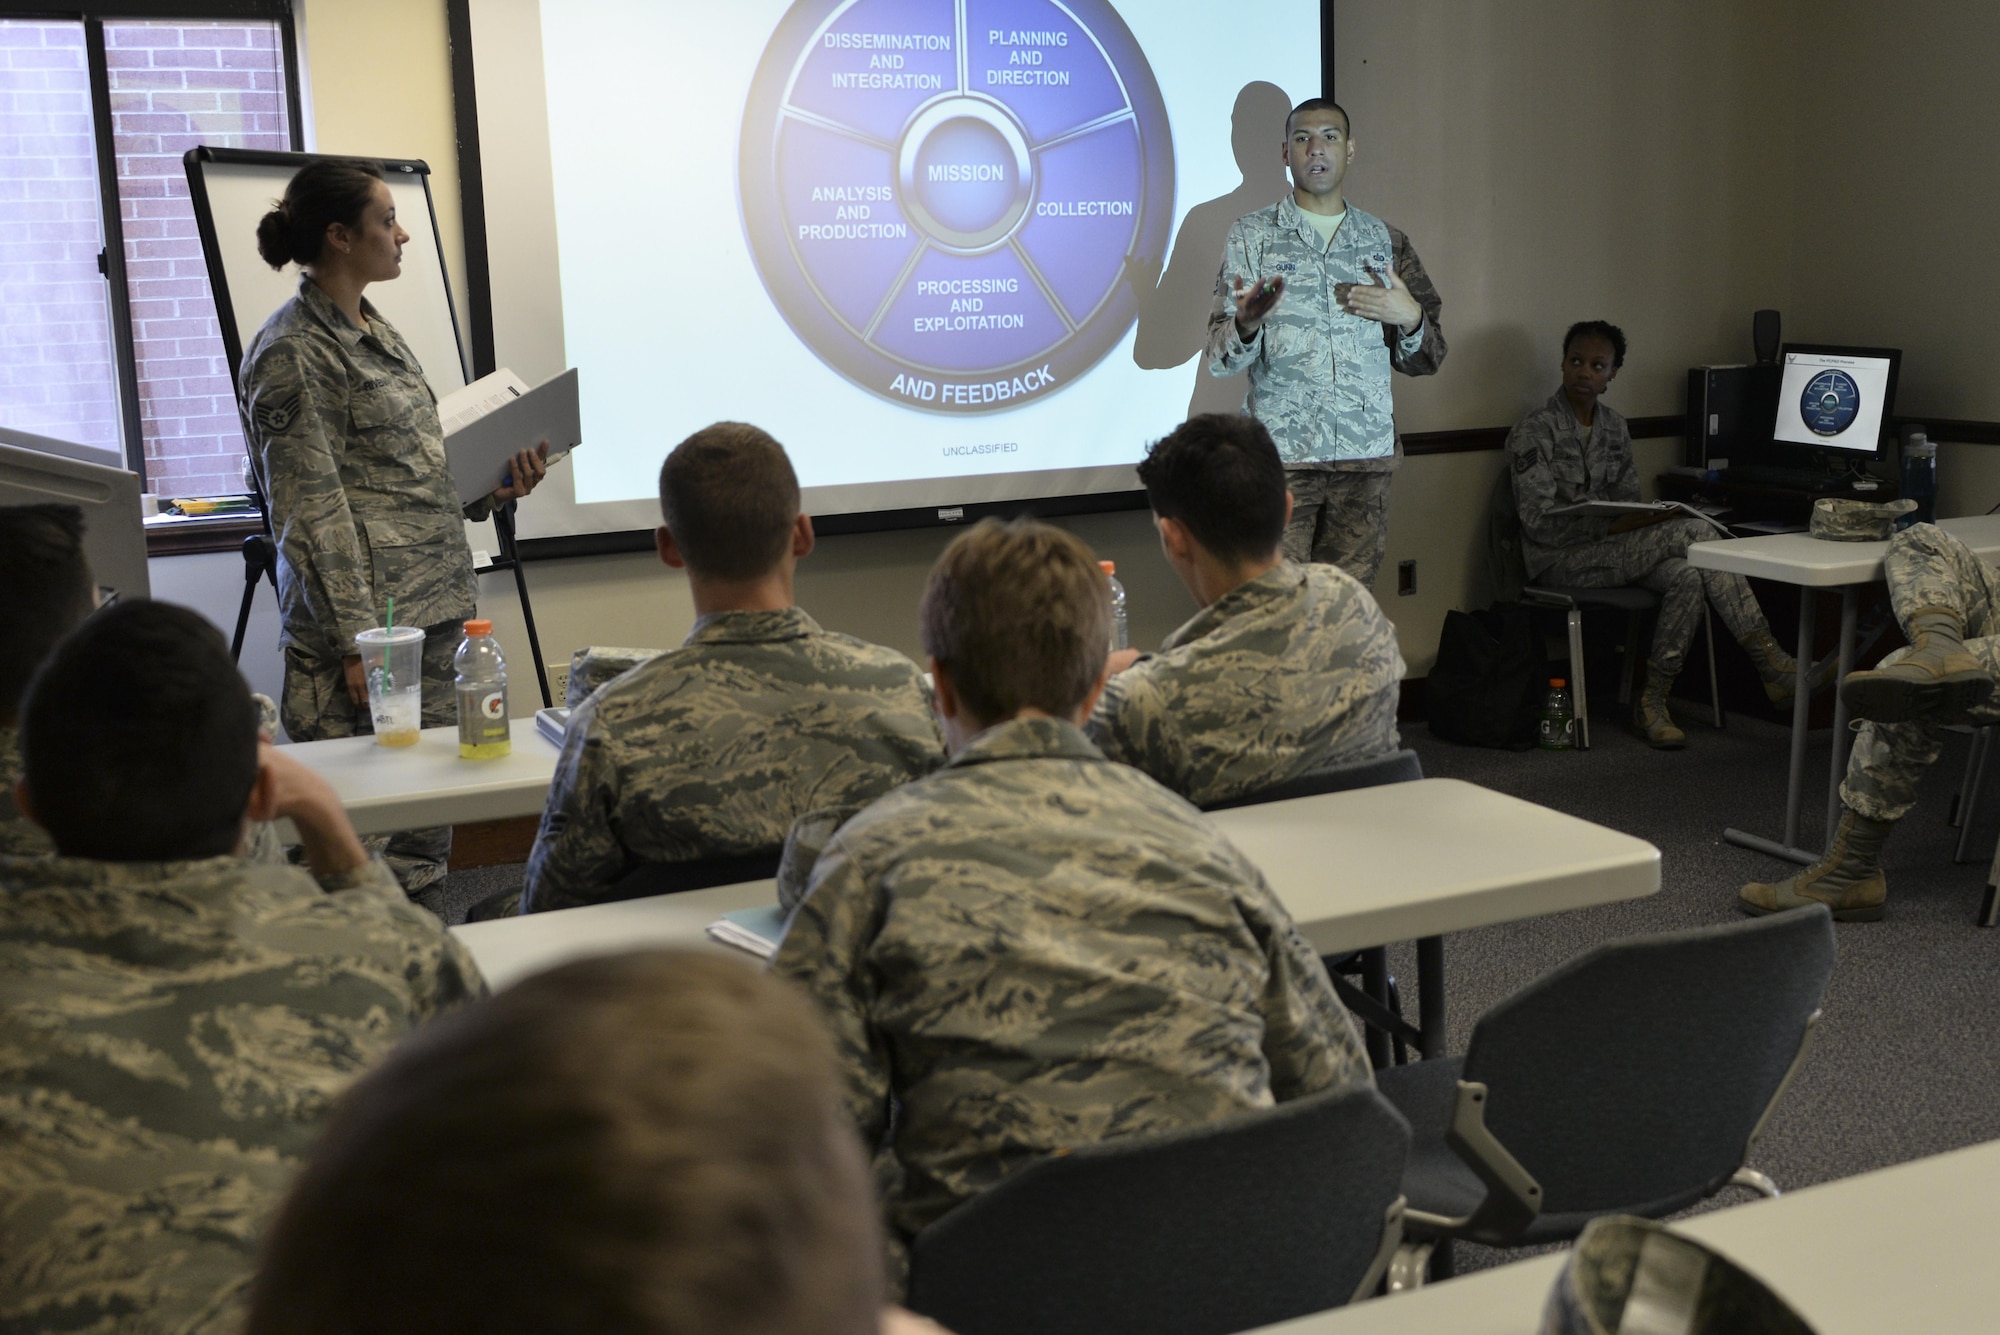 Staff Sgt. Bazil Rivera and David Gunn, 70th Operations Support Squadron, brief intelligence Airmen from the 70th Intelligence, Surveillance and Reconnaissance Wing during their National Tactical Integration training November 4, 2016 at Fort Meade, Md. AF NTI works as an enterprise that collaborates to enhance Air Component operations around the world, as well as leveraging critical nation Intelligence Community information and capabilities. (U.S. Air Force photo/Staff Sgt. Alexandre Montes)

